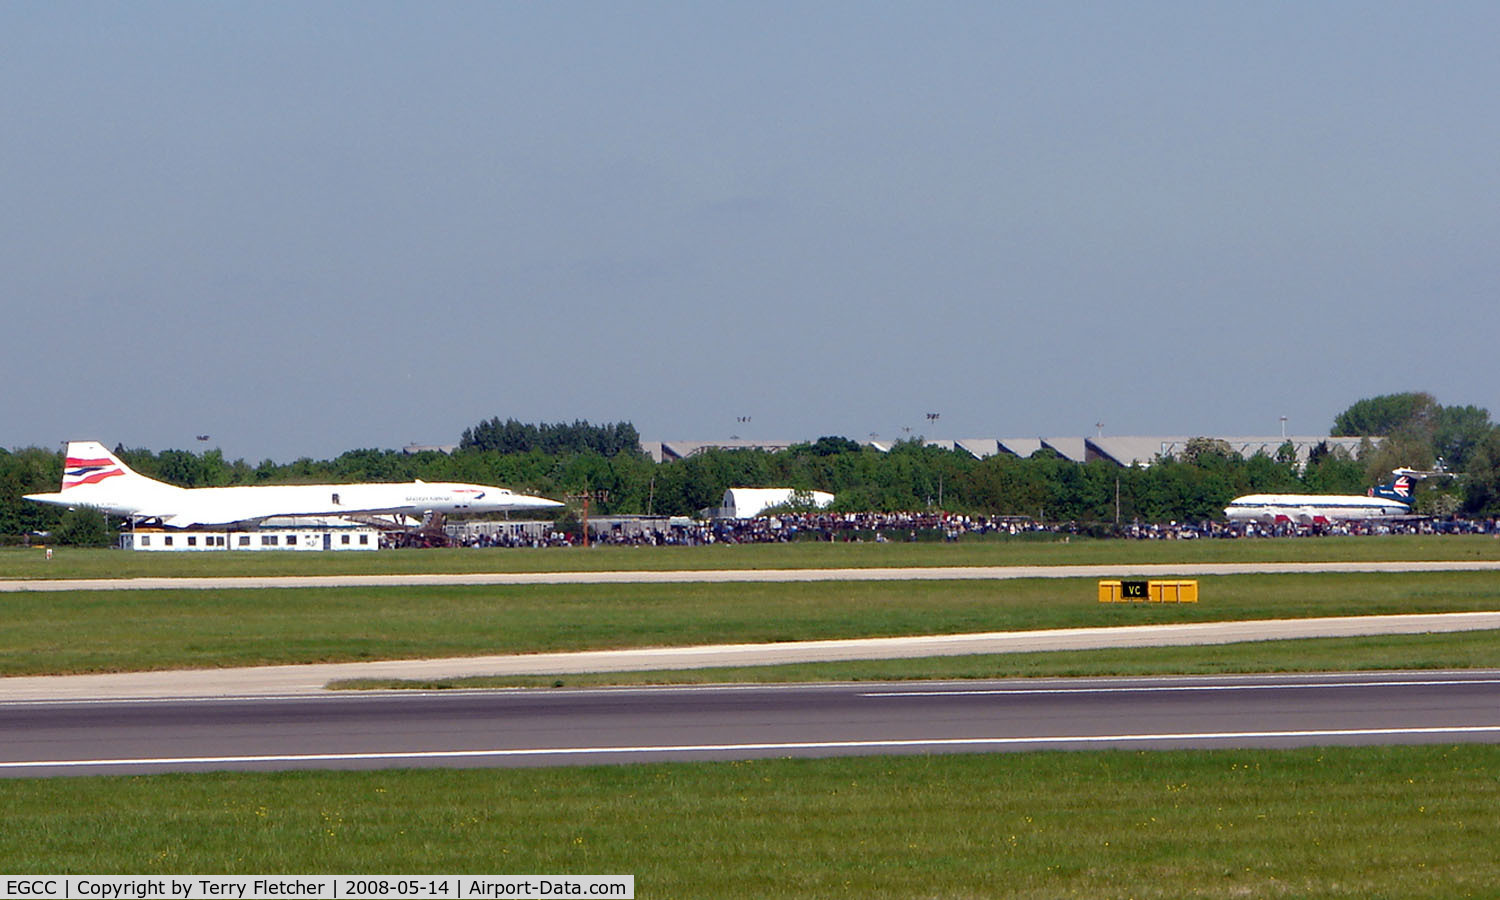 Manchester Airport, Manchester, England United Kingdom (EGCC) - The UEFA Cup Final (Soccer) in Manchester UK attracted many enthusiasts and photographers to the Aviation Viewing Park